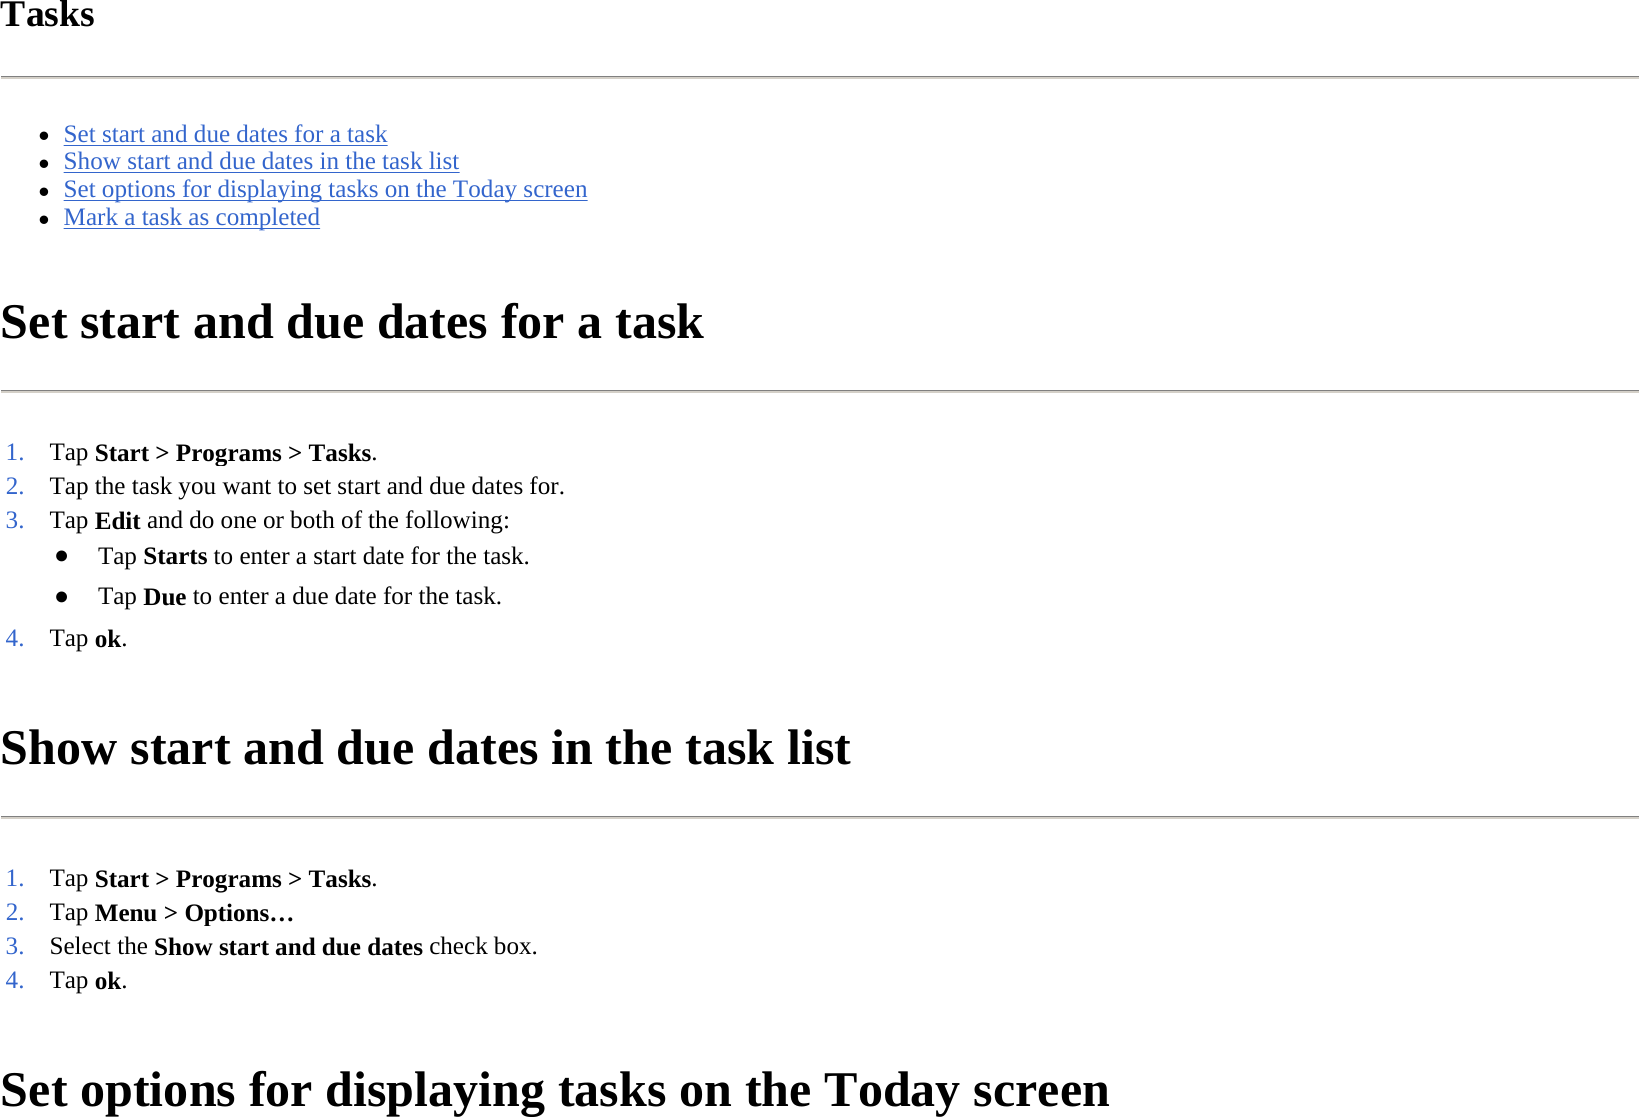 Tasks  zSet start and due dates for a task  zShow start and due dates in the task list  zSet options for displaying tasks on the Today screen  zMark a task as completed  Set start and due dates for a task  Show start and due dates in the task list  Set options for displaying tasks on the Today screen  1. Tap Start &gt; Programs &gt;Tasks. 2. Tap the task you want to set start and due dates for.3. Tap Edit and do one or both of the following:●Tap Starts to enter a start date for the task.●Tap Due to enter a due date for the task.4. Tap ok. 1. Tap Start &gt; Programs &gt;Tasks. 2. Tap Menu &gt; Options…3. Select the Show start and due dates check box.4. Tap ok. 